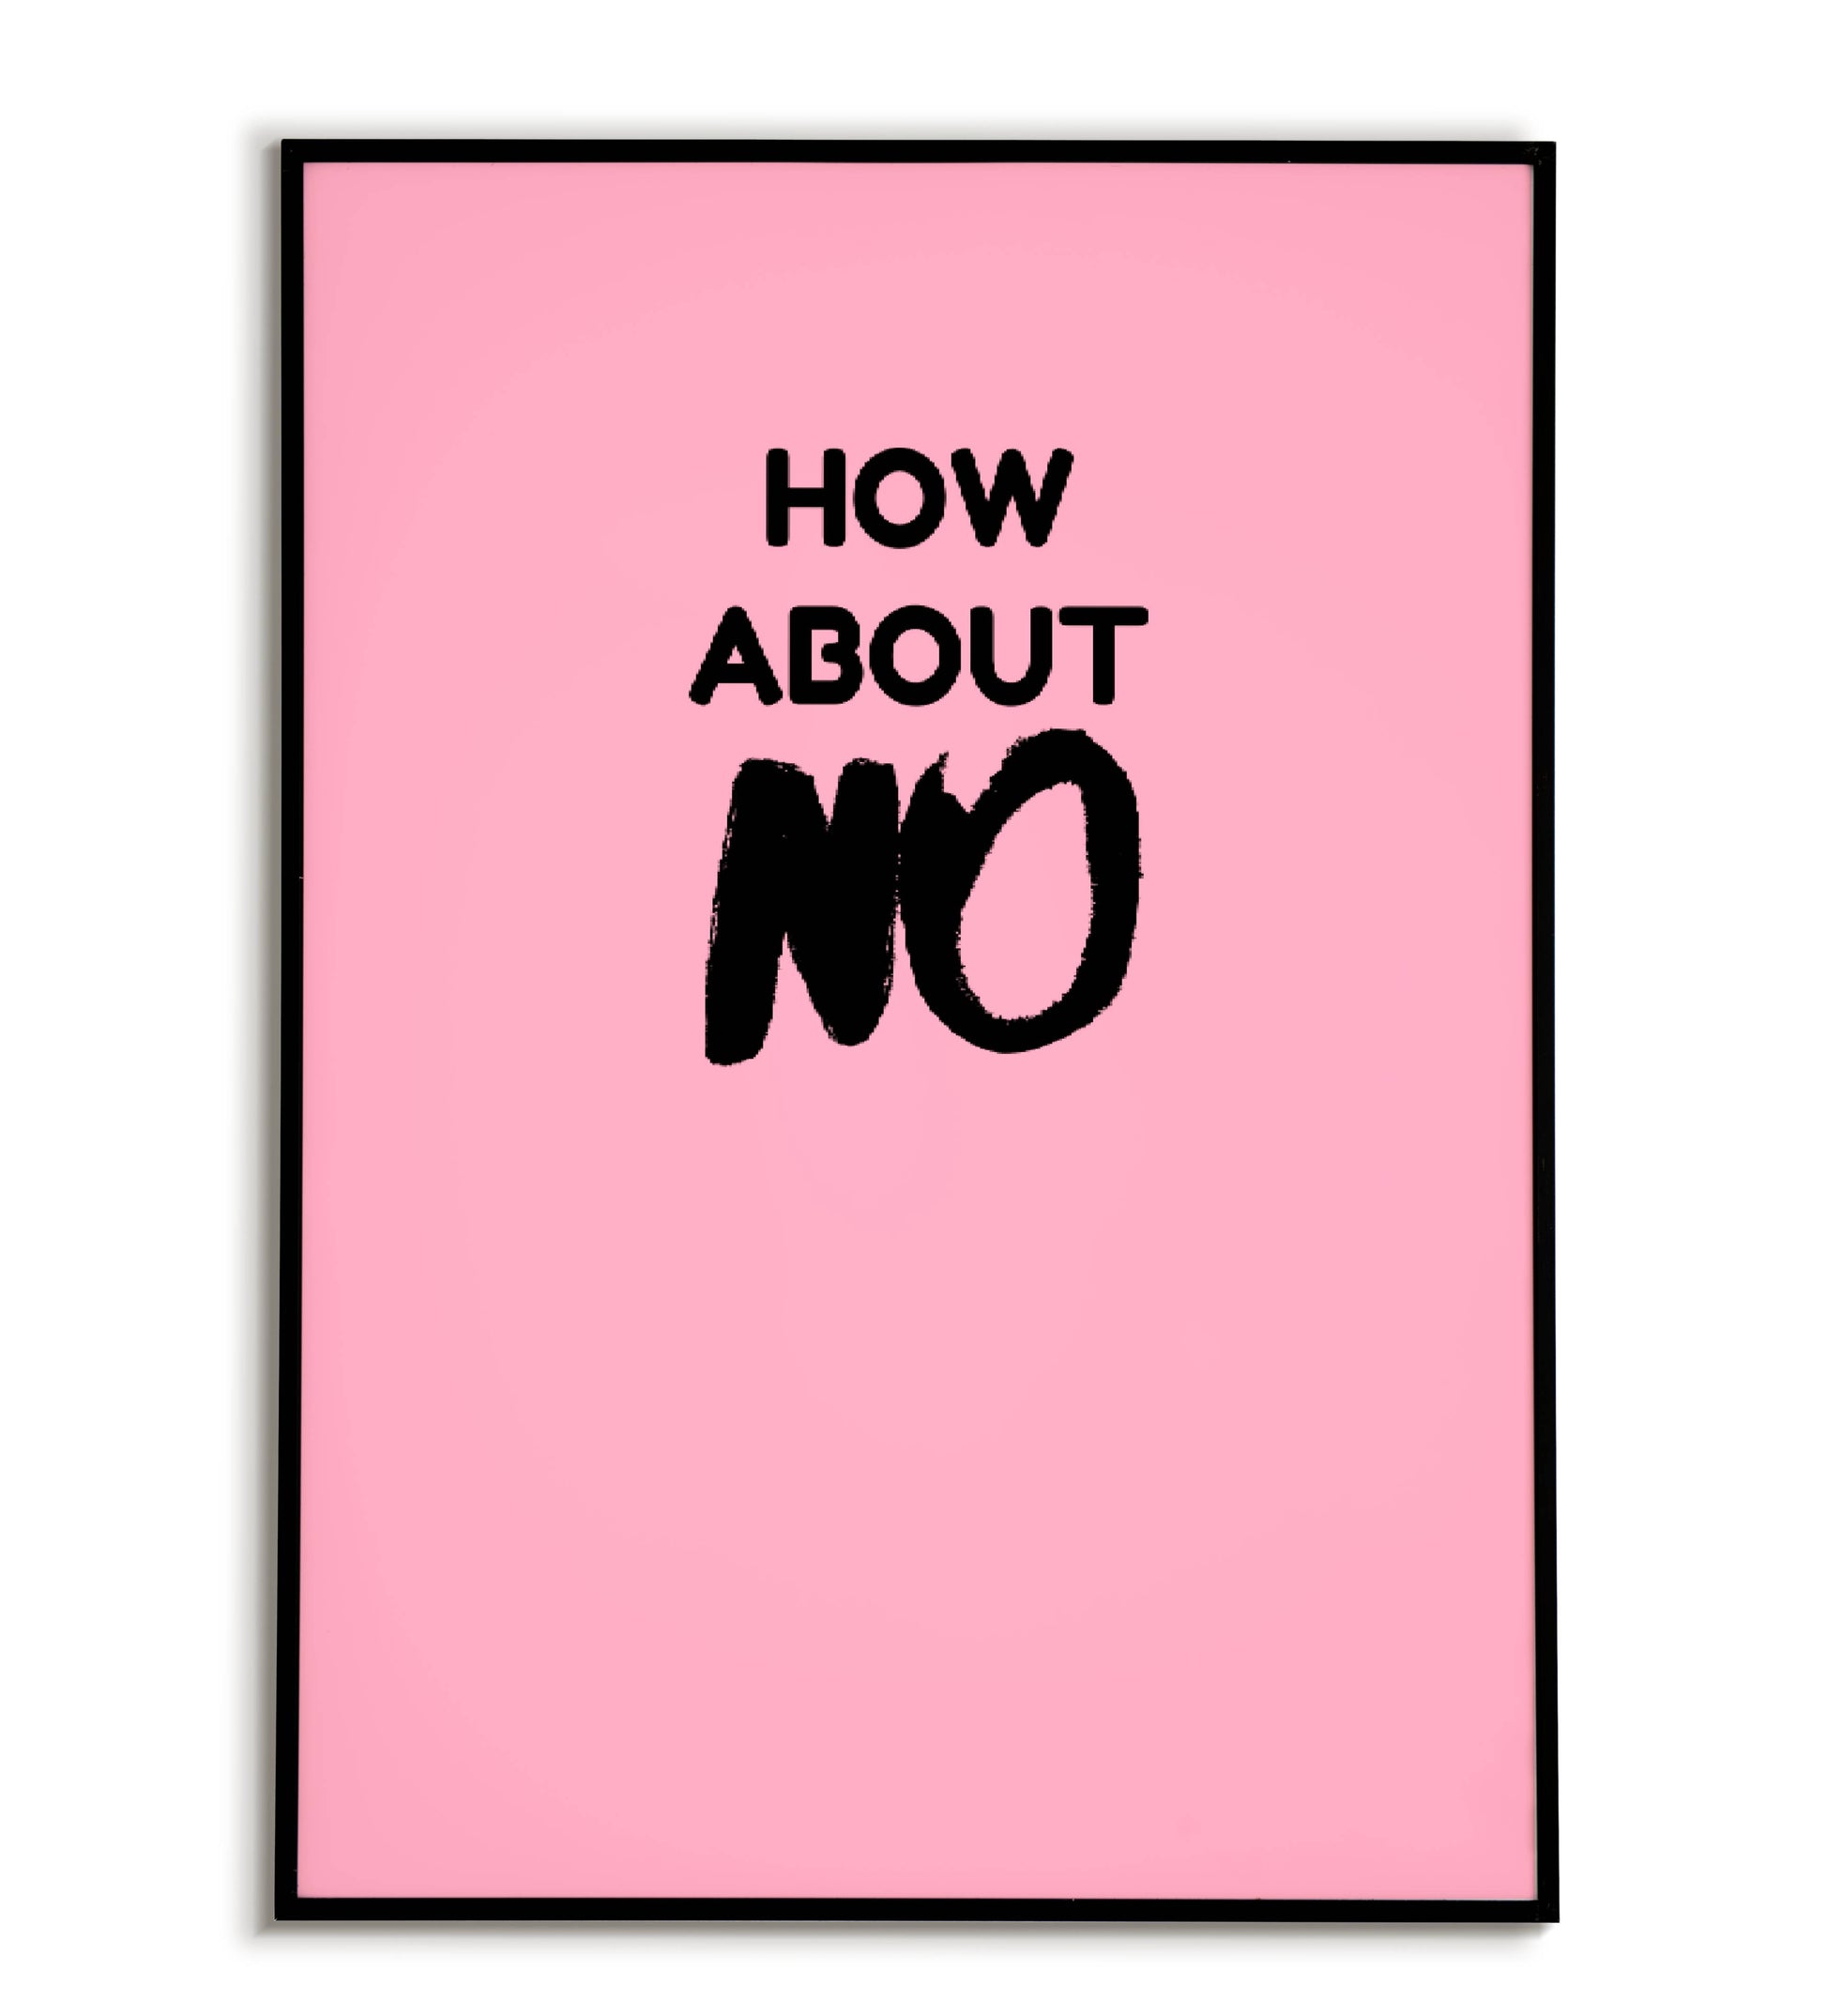 Humorous "How about NO" printable poster, playfully expressing your disapproval or setting boundaries.	